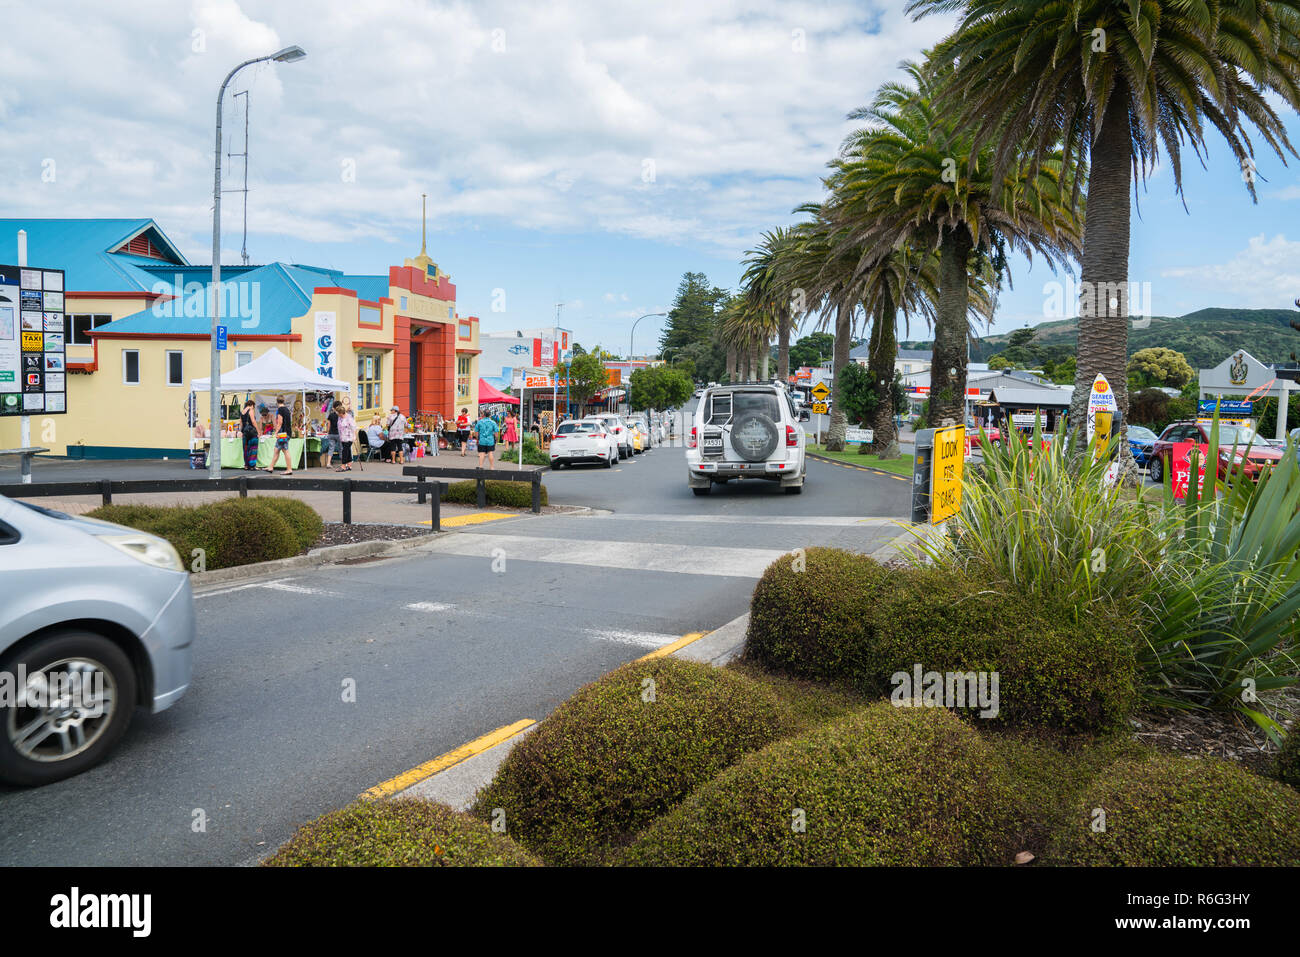 RAGLAN, NEW ZEALAND - JANUARY 14, 2018; View along Bow Street in small town on busy summer Sunday morning vehilces, local market and people moving abo Stock Photo